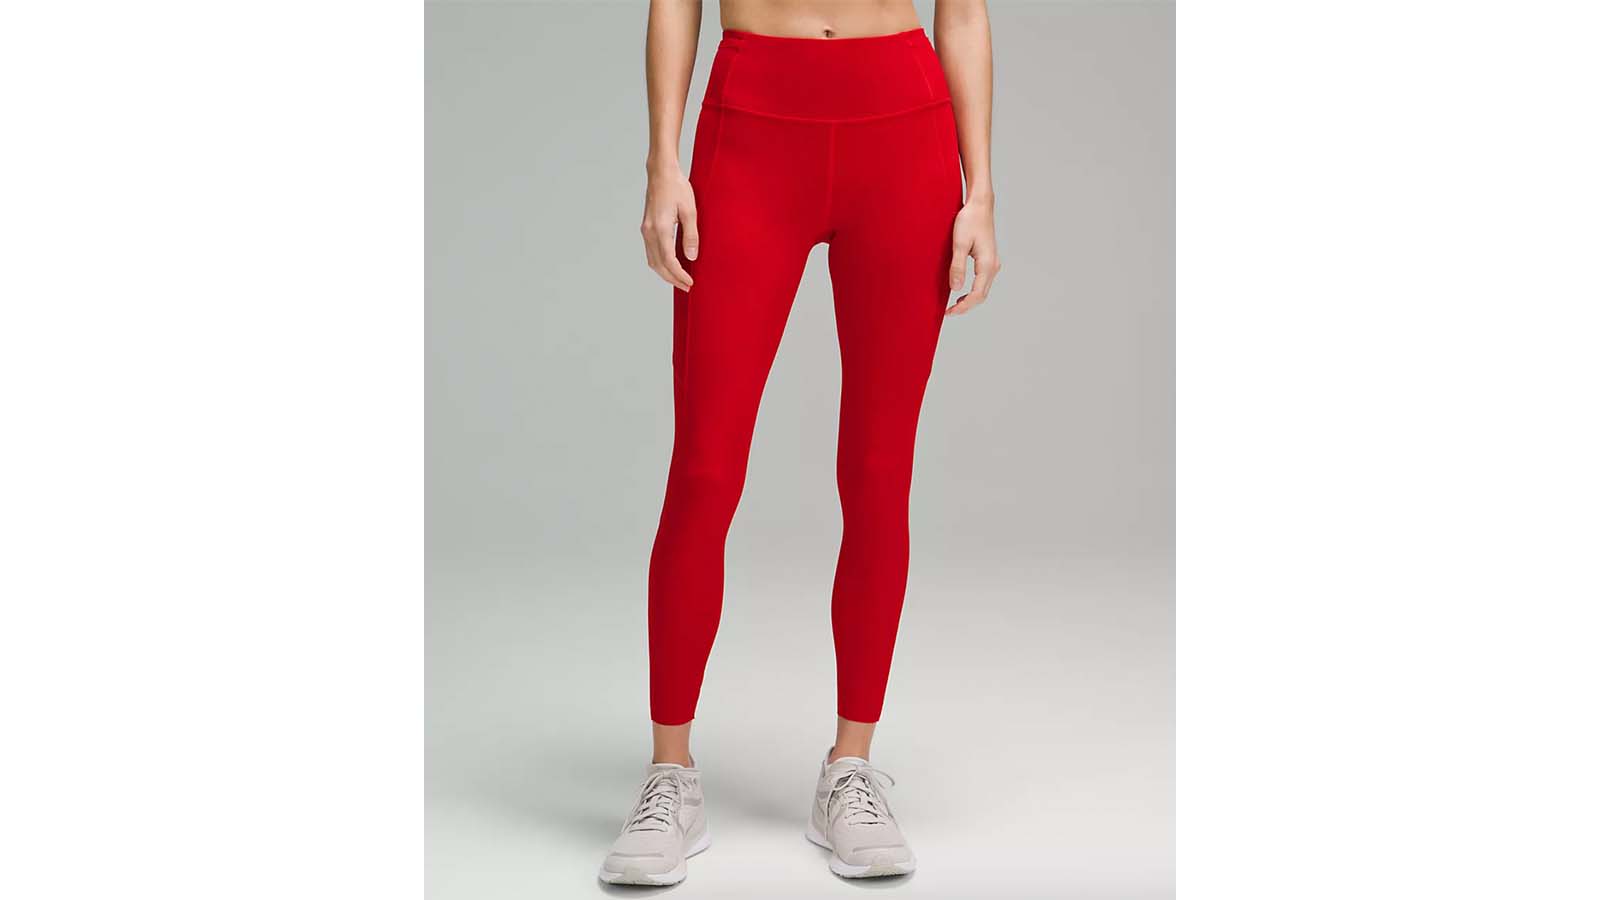 THE YOUTH CULTURE REPORT » Flashback: Lululemon Leggings Are The Hottest  Item In Teen Retail